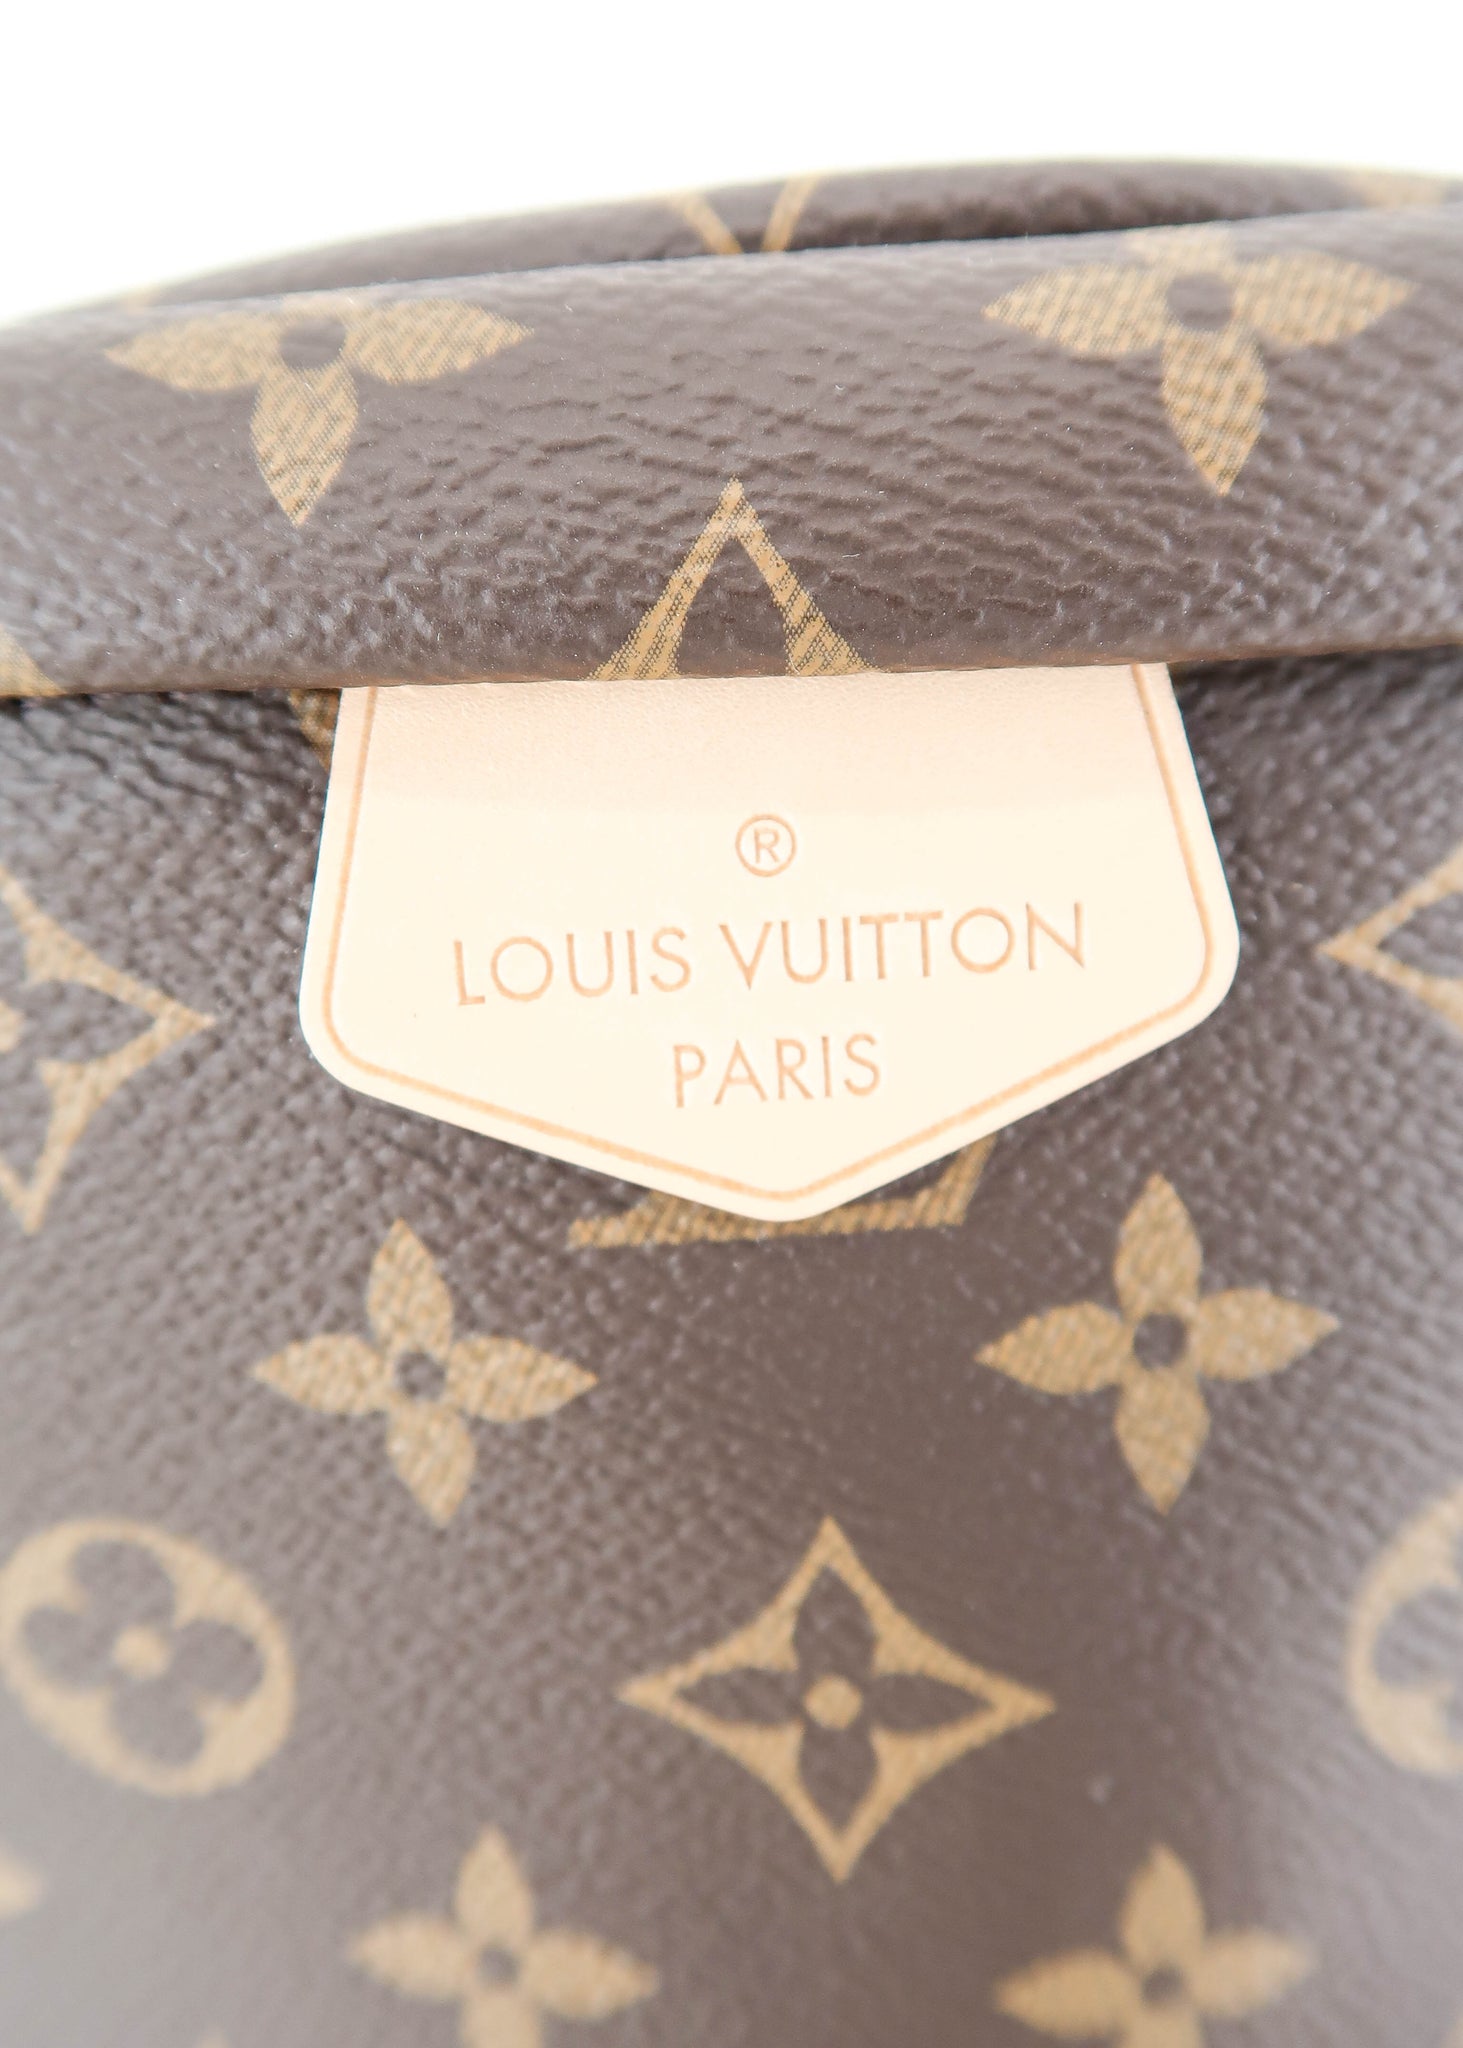 Thoughts on the new bum bag? : r/Louisvuitton